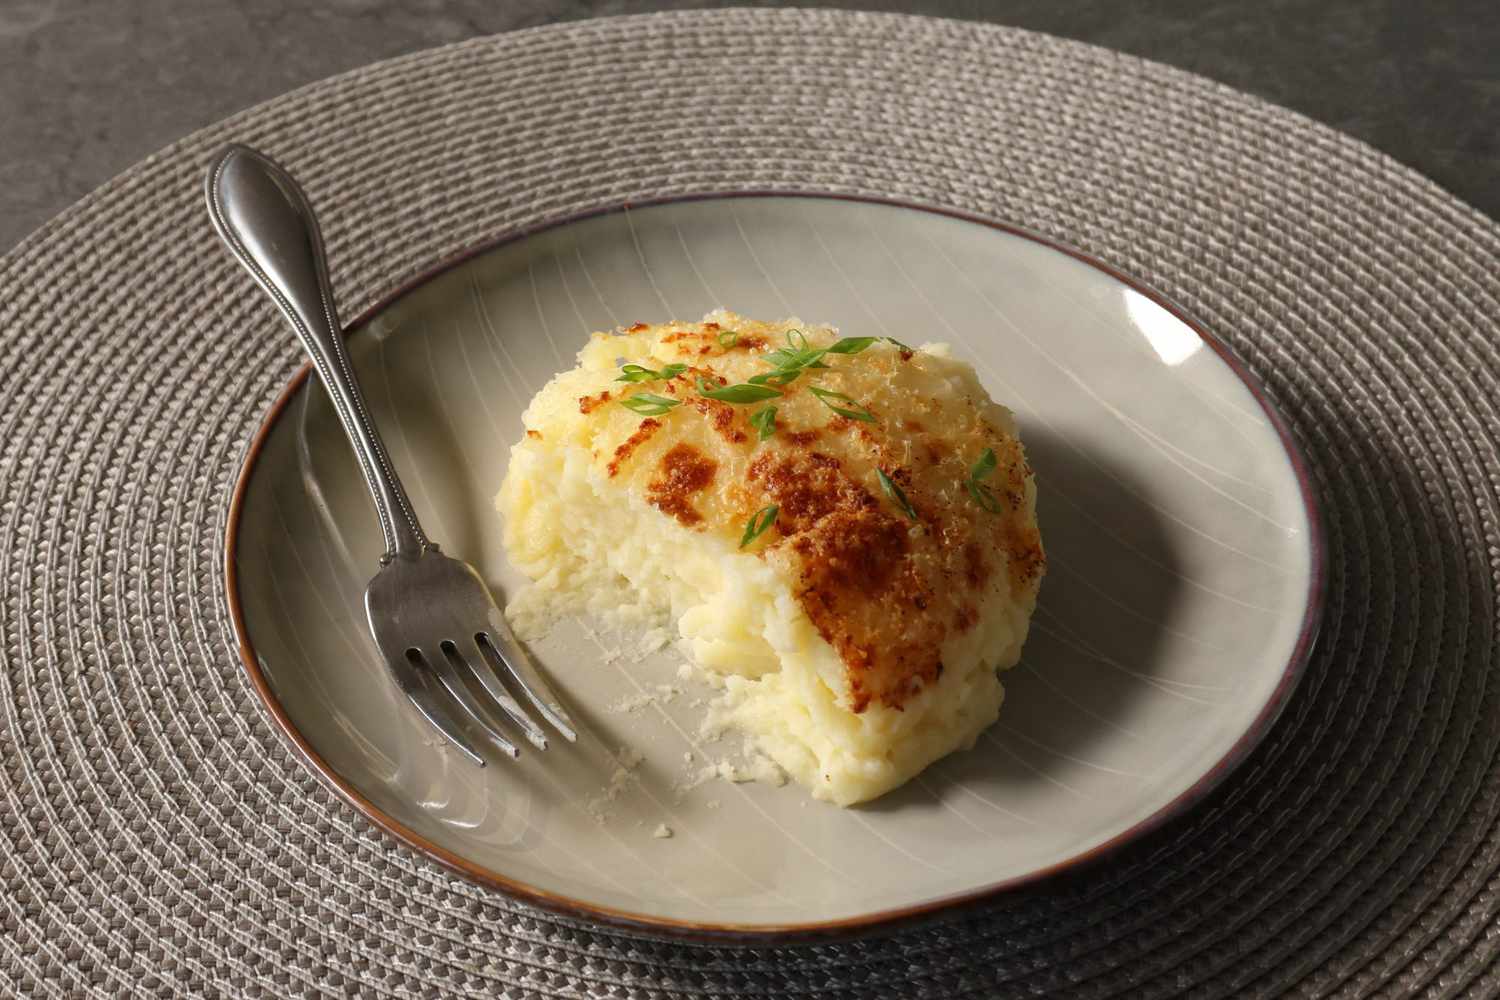 scoop of mashed potato casserole on a plate